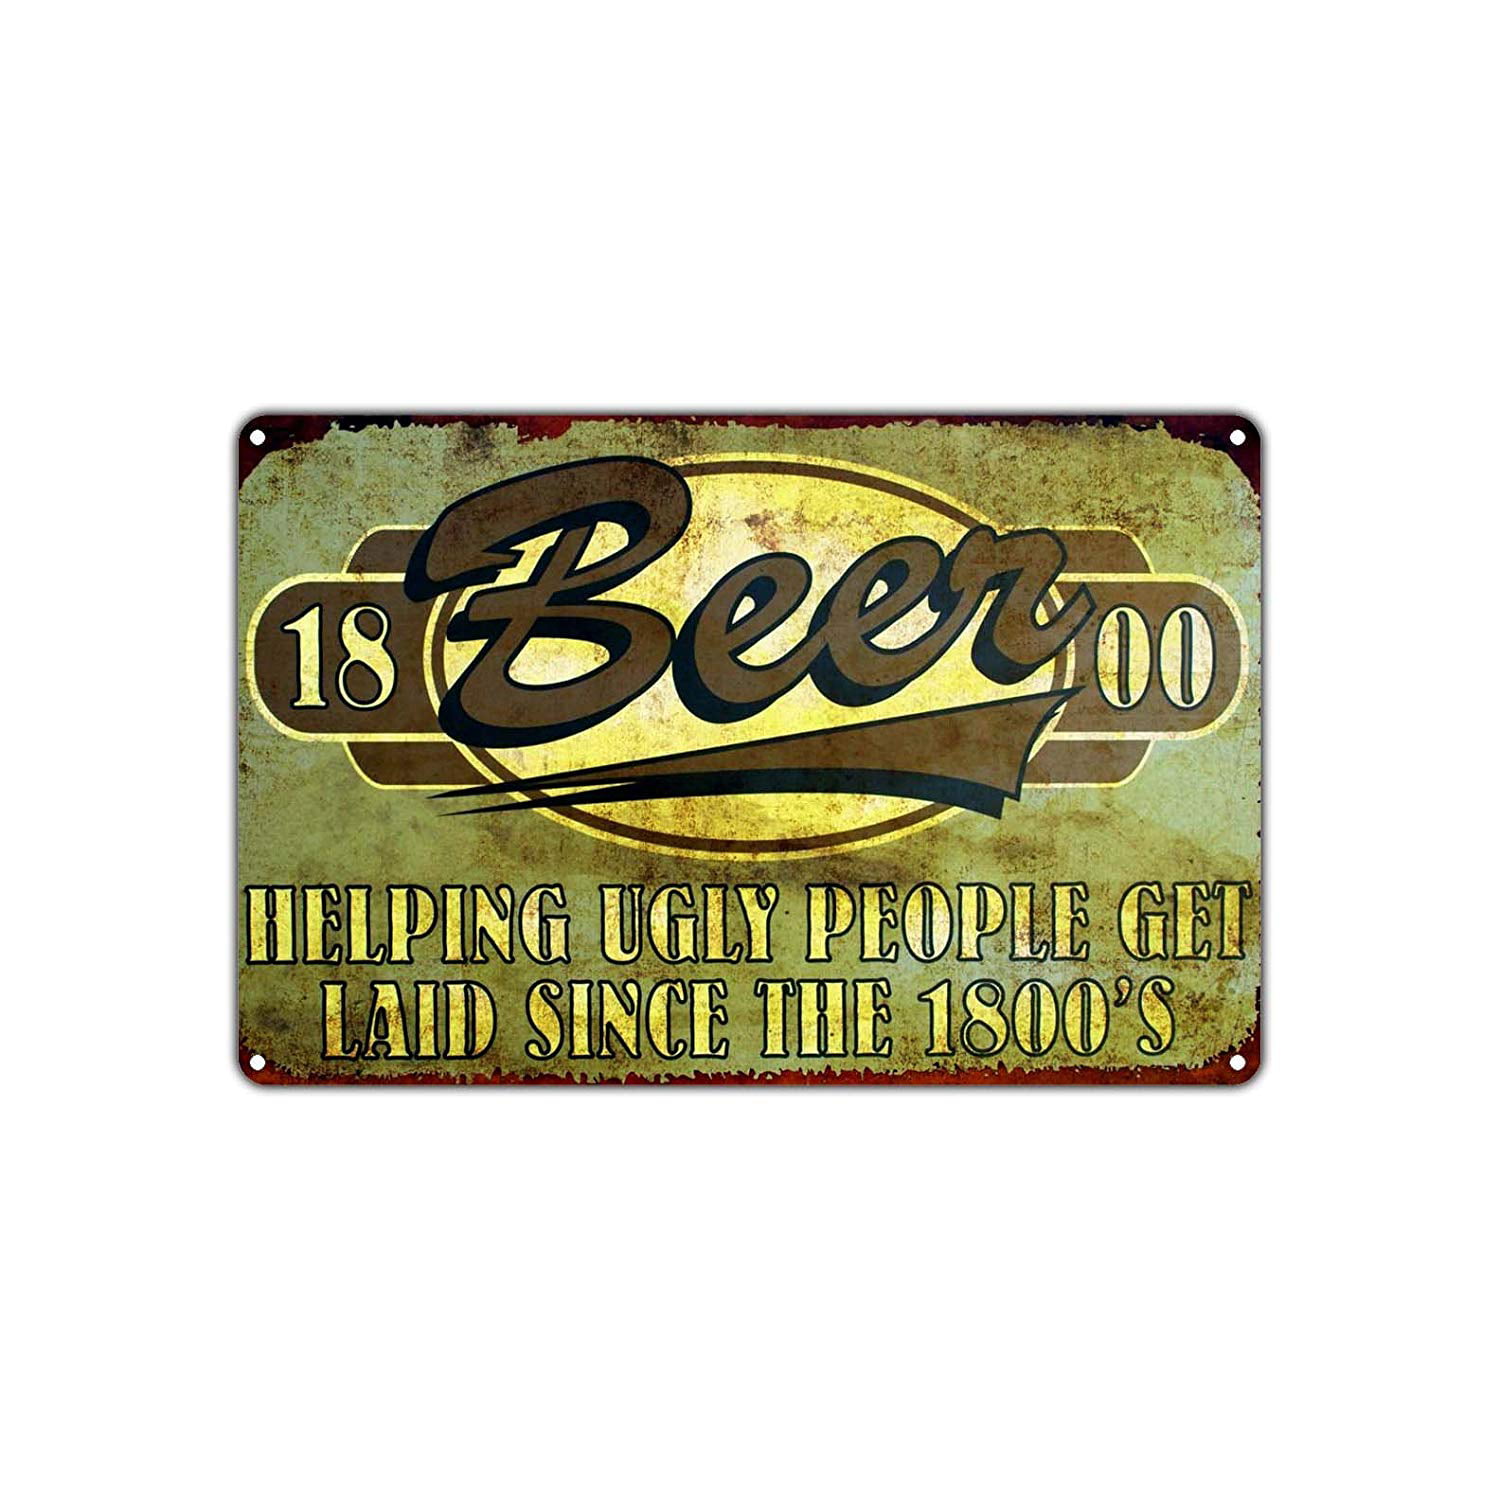 Helping ugly people ..." 12 x 8 in made in USA Funny embossed metal sign "BEER 